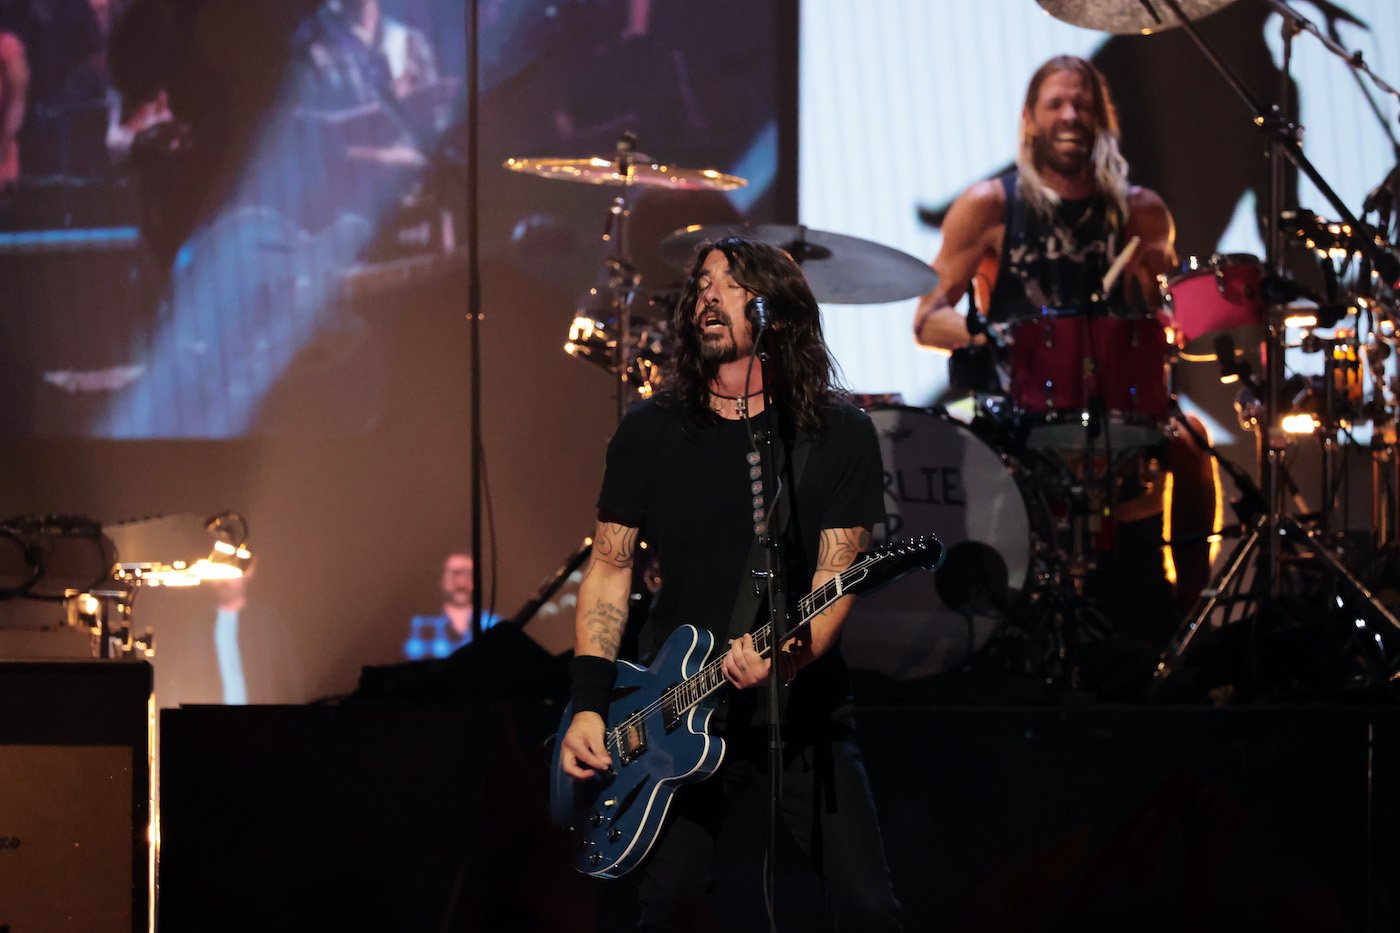 Dave Grohl rocks out at the 2021 MTV Video Music Awards in 2021